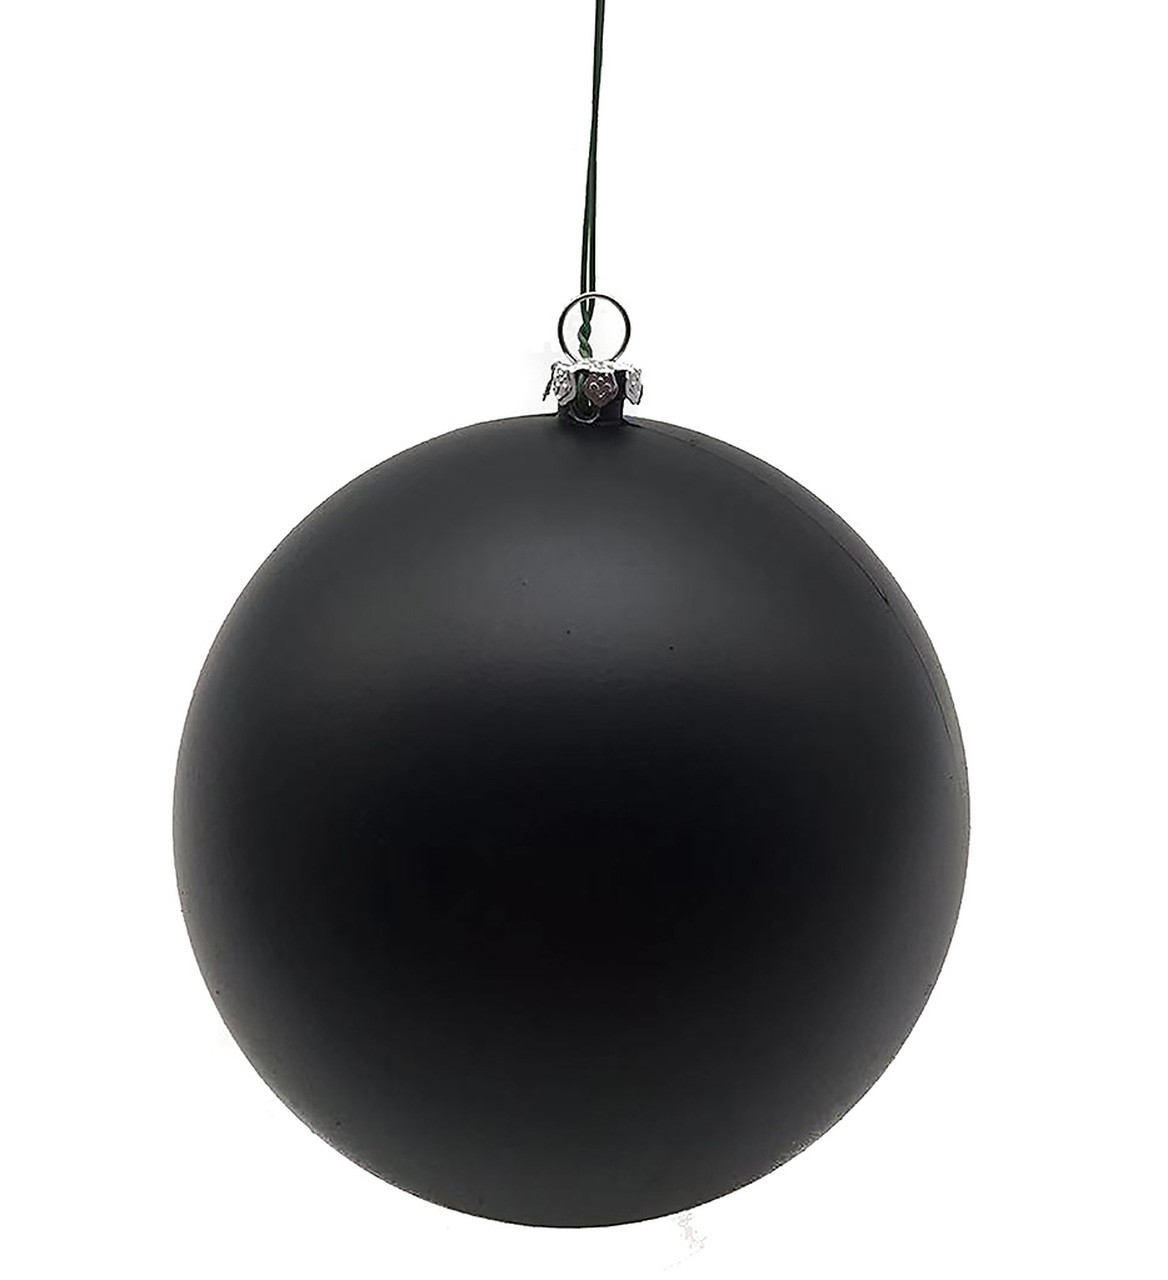 Earthflora > Christmas Tree Ornaments and Trimmings > Matte Black Ball ...